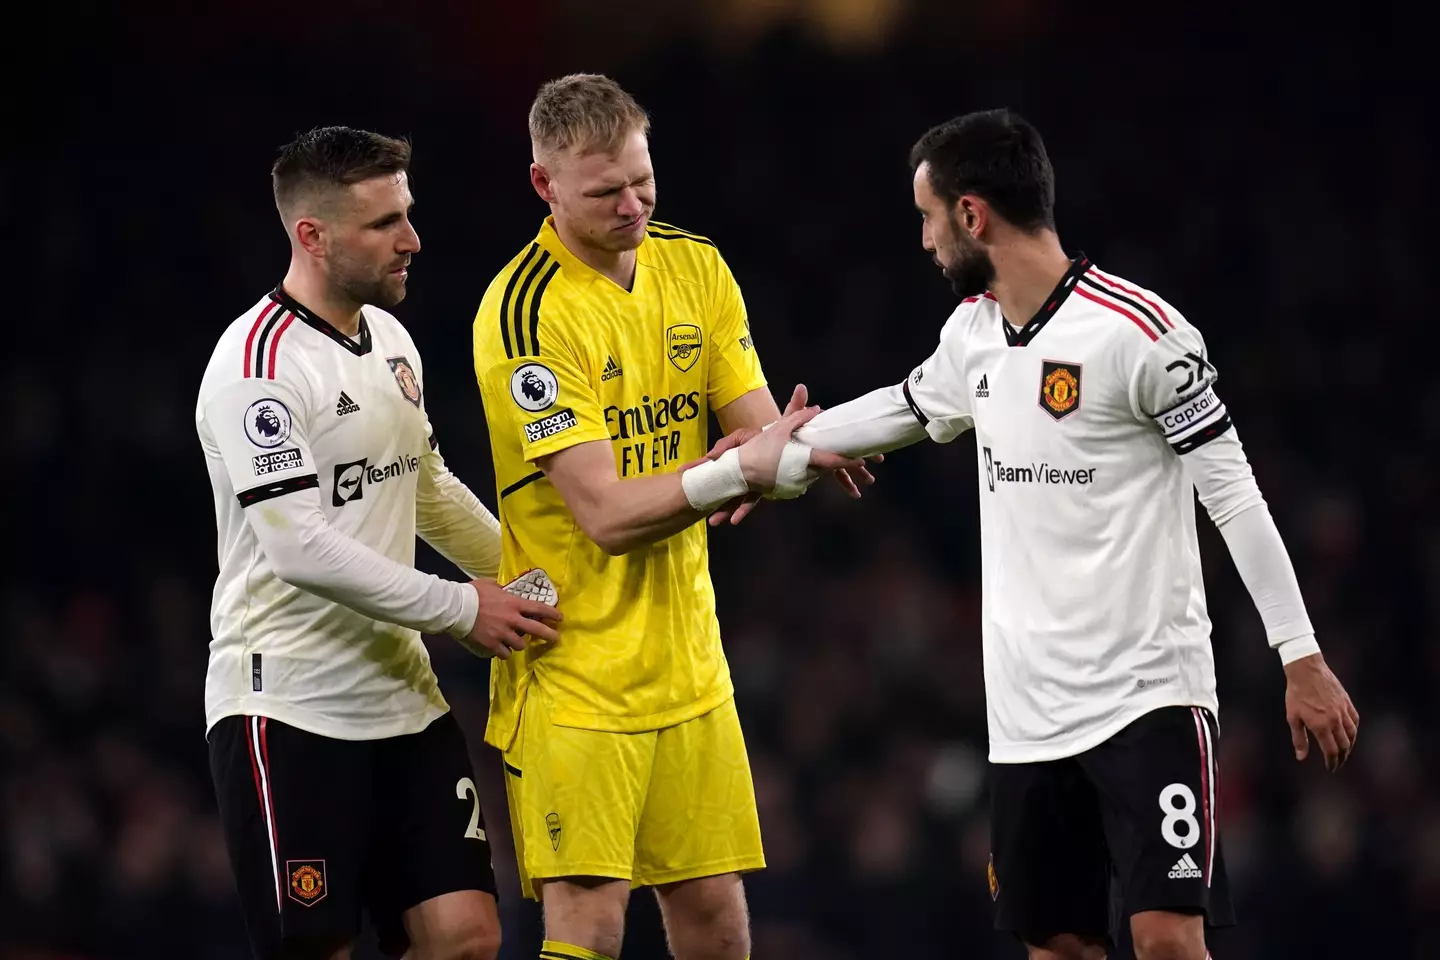 Luke Shaw and Bruno Fernandes in conversation with Arsenal goalkeeper Aaron Ramsdale. (Image